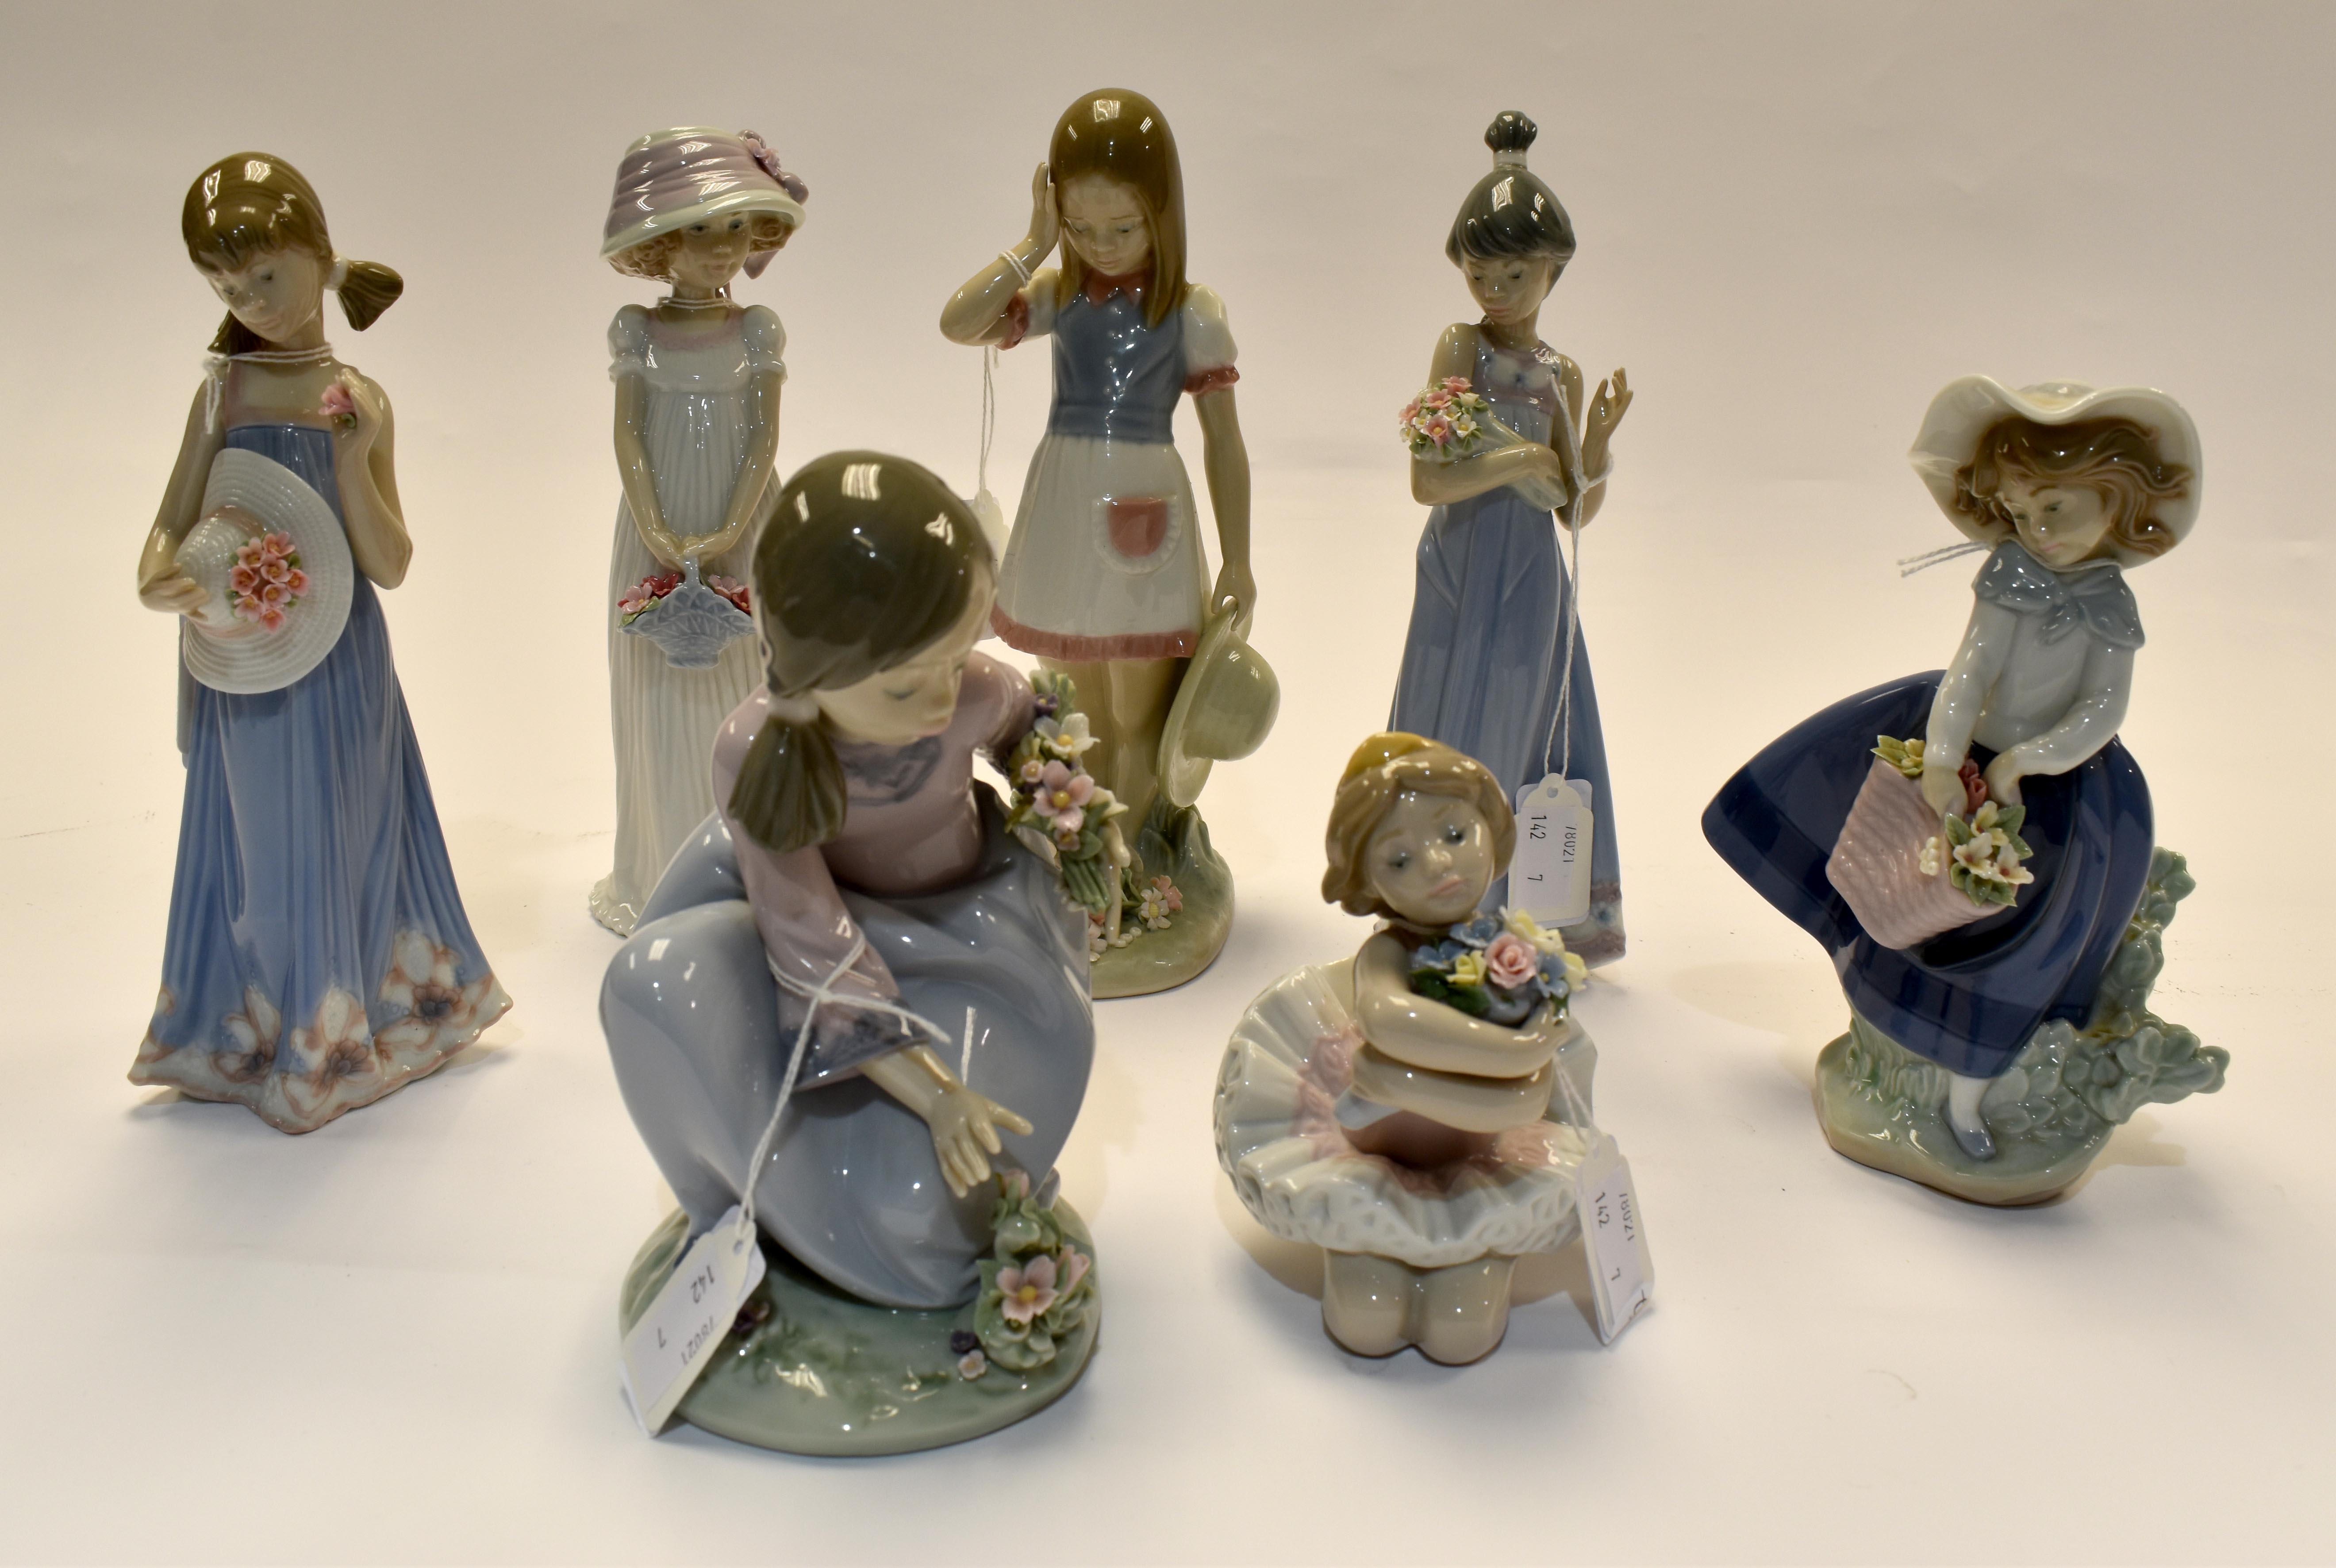 7 Lladro figures of girls with encrusted flower decoraTION. Condition: Girl with flowers in arm- one